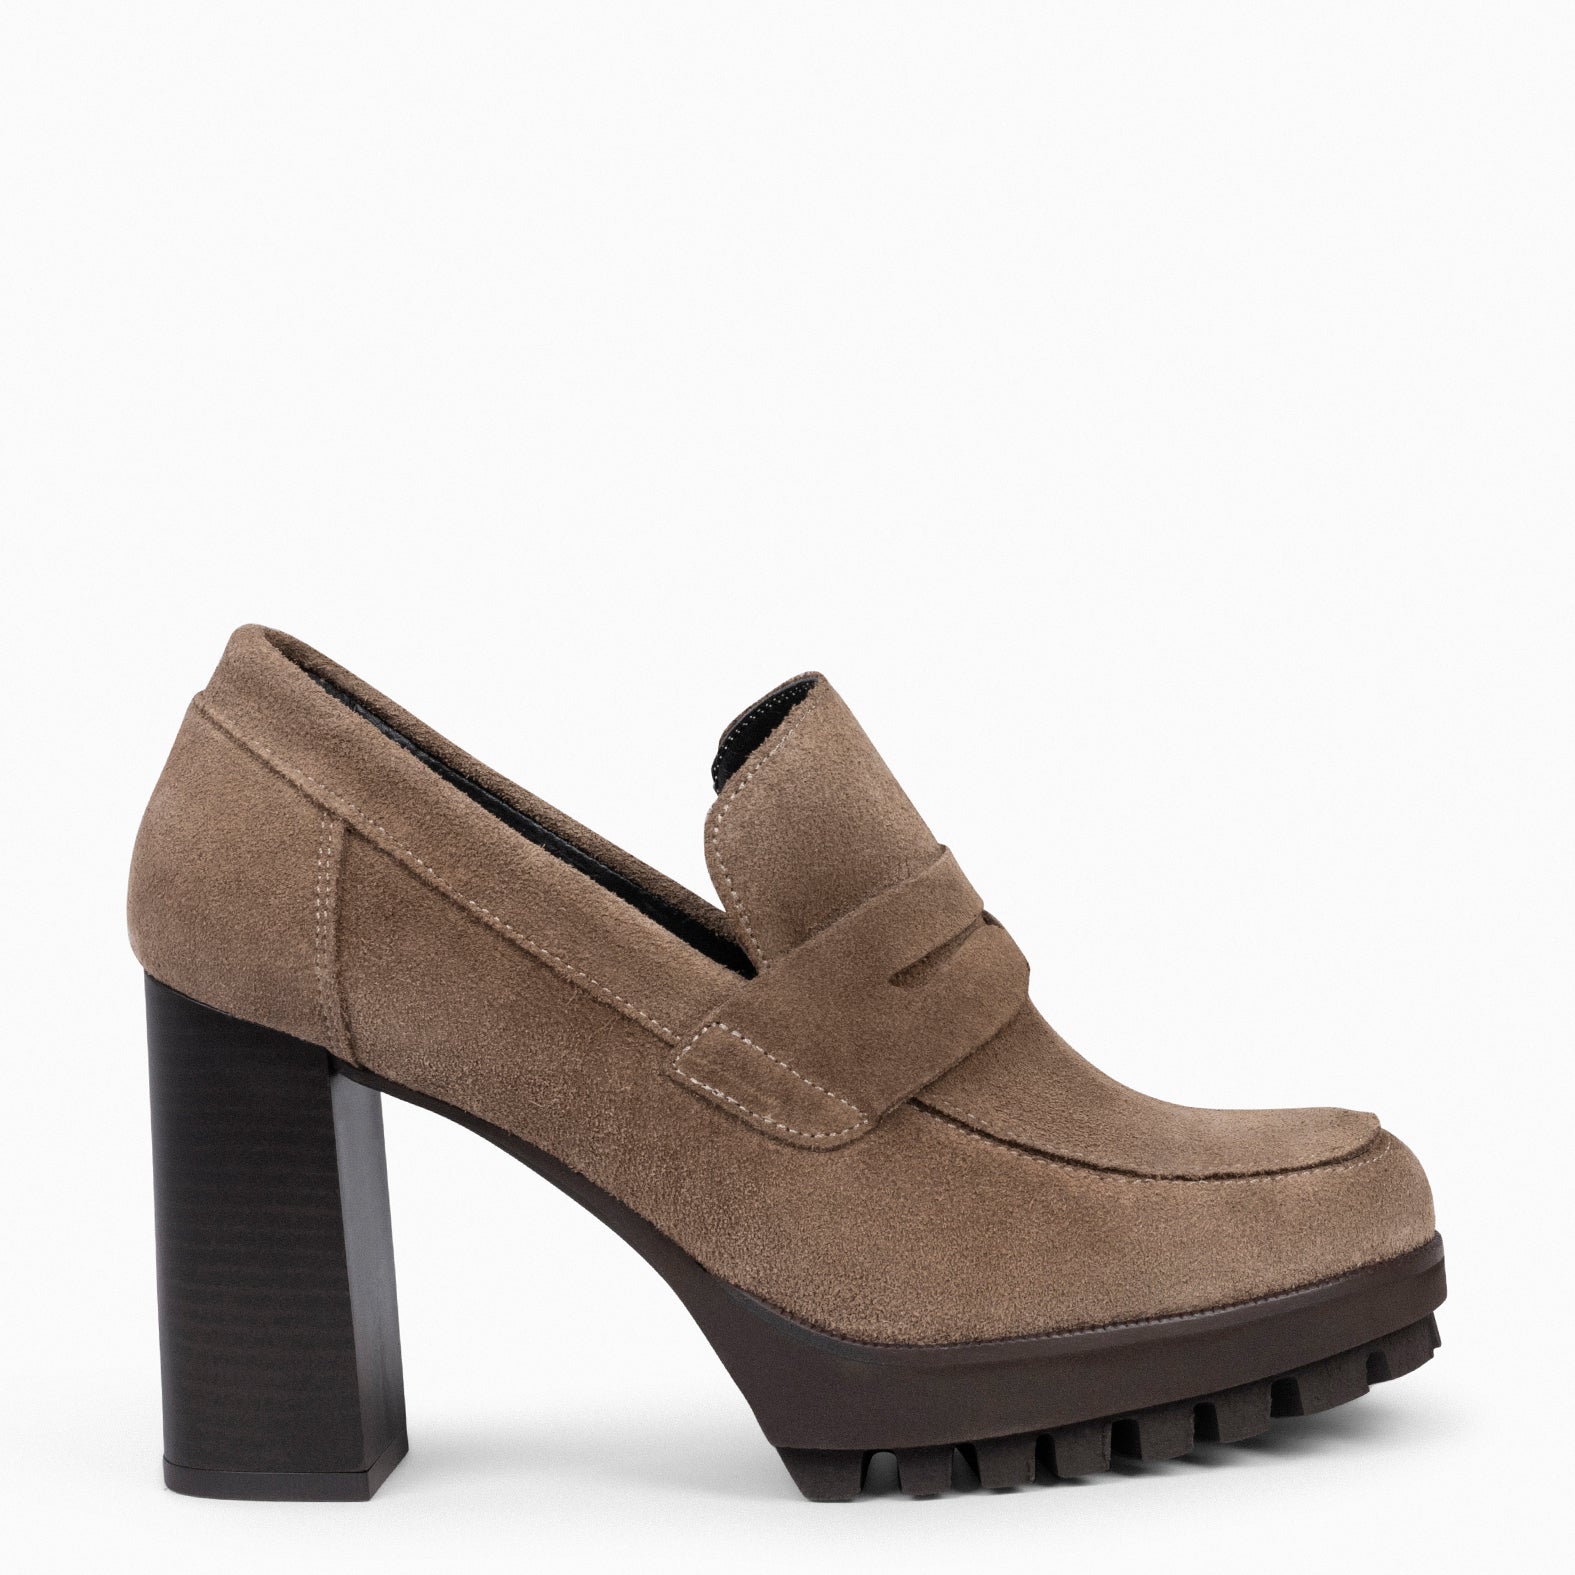 TREND – TAUPE high heel moccasins with platform 